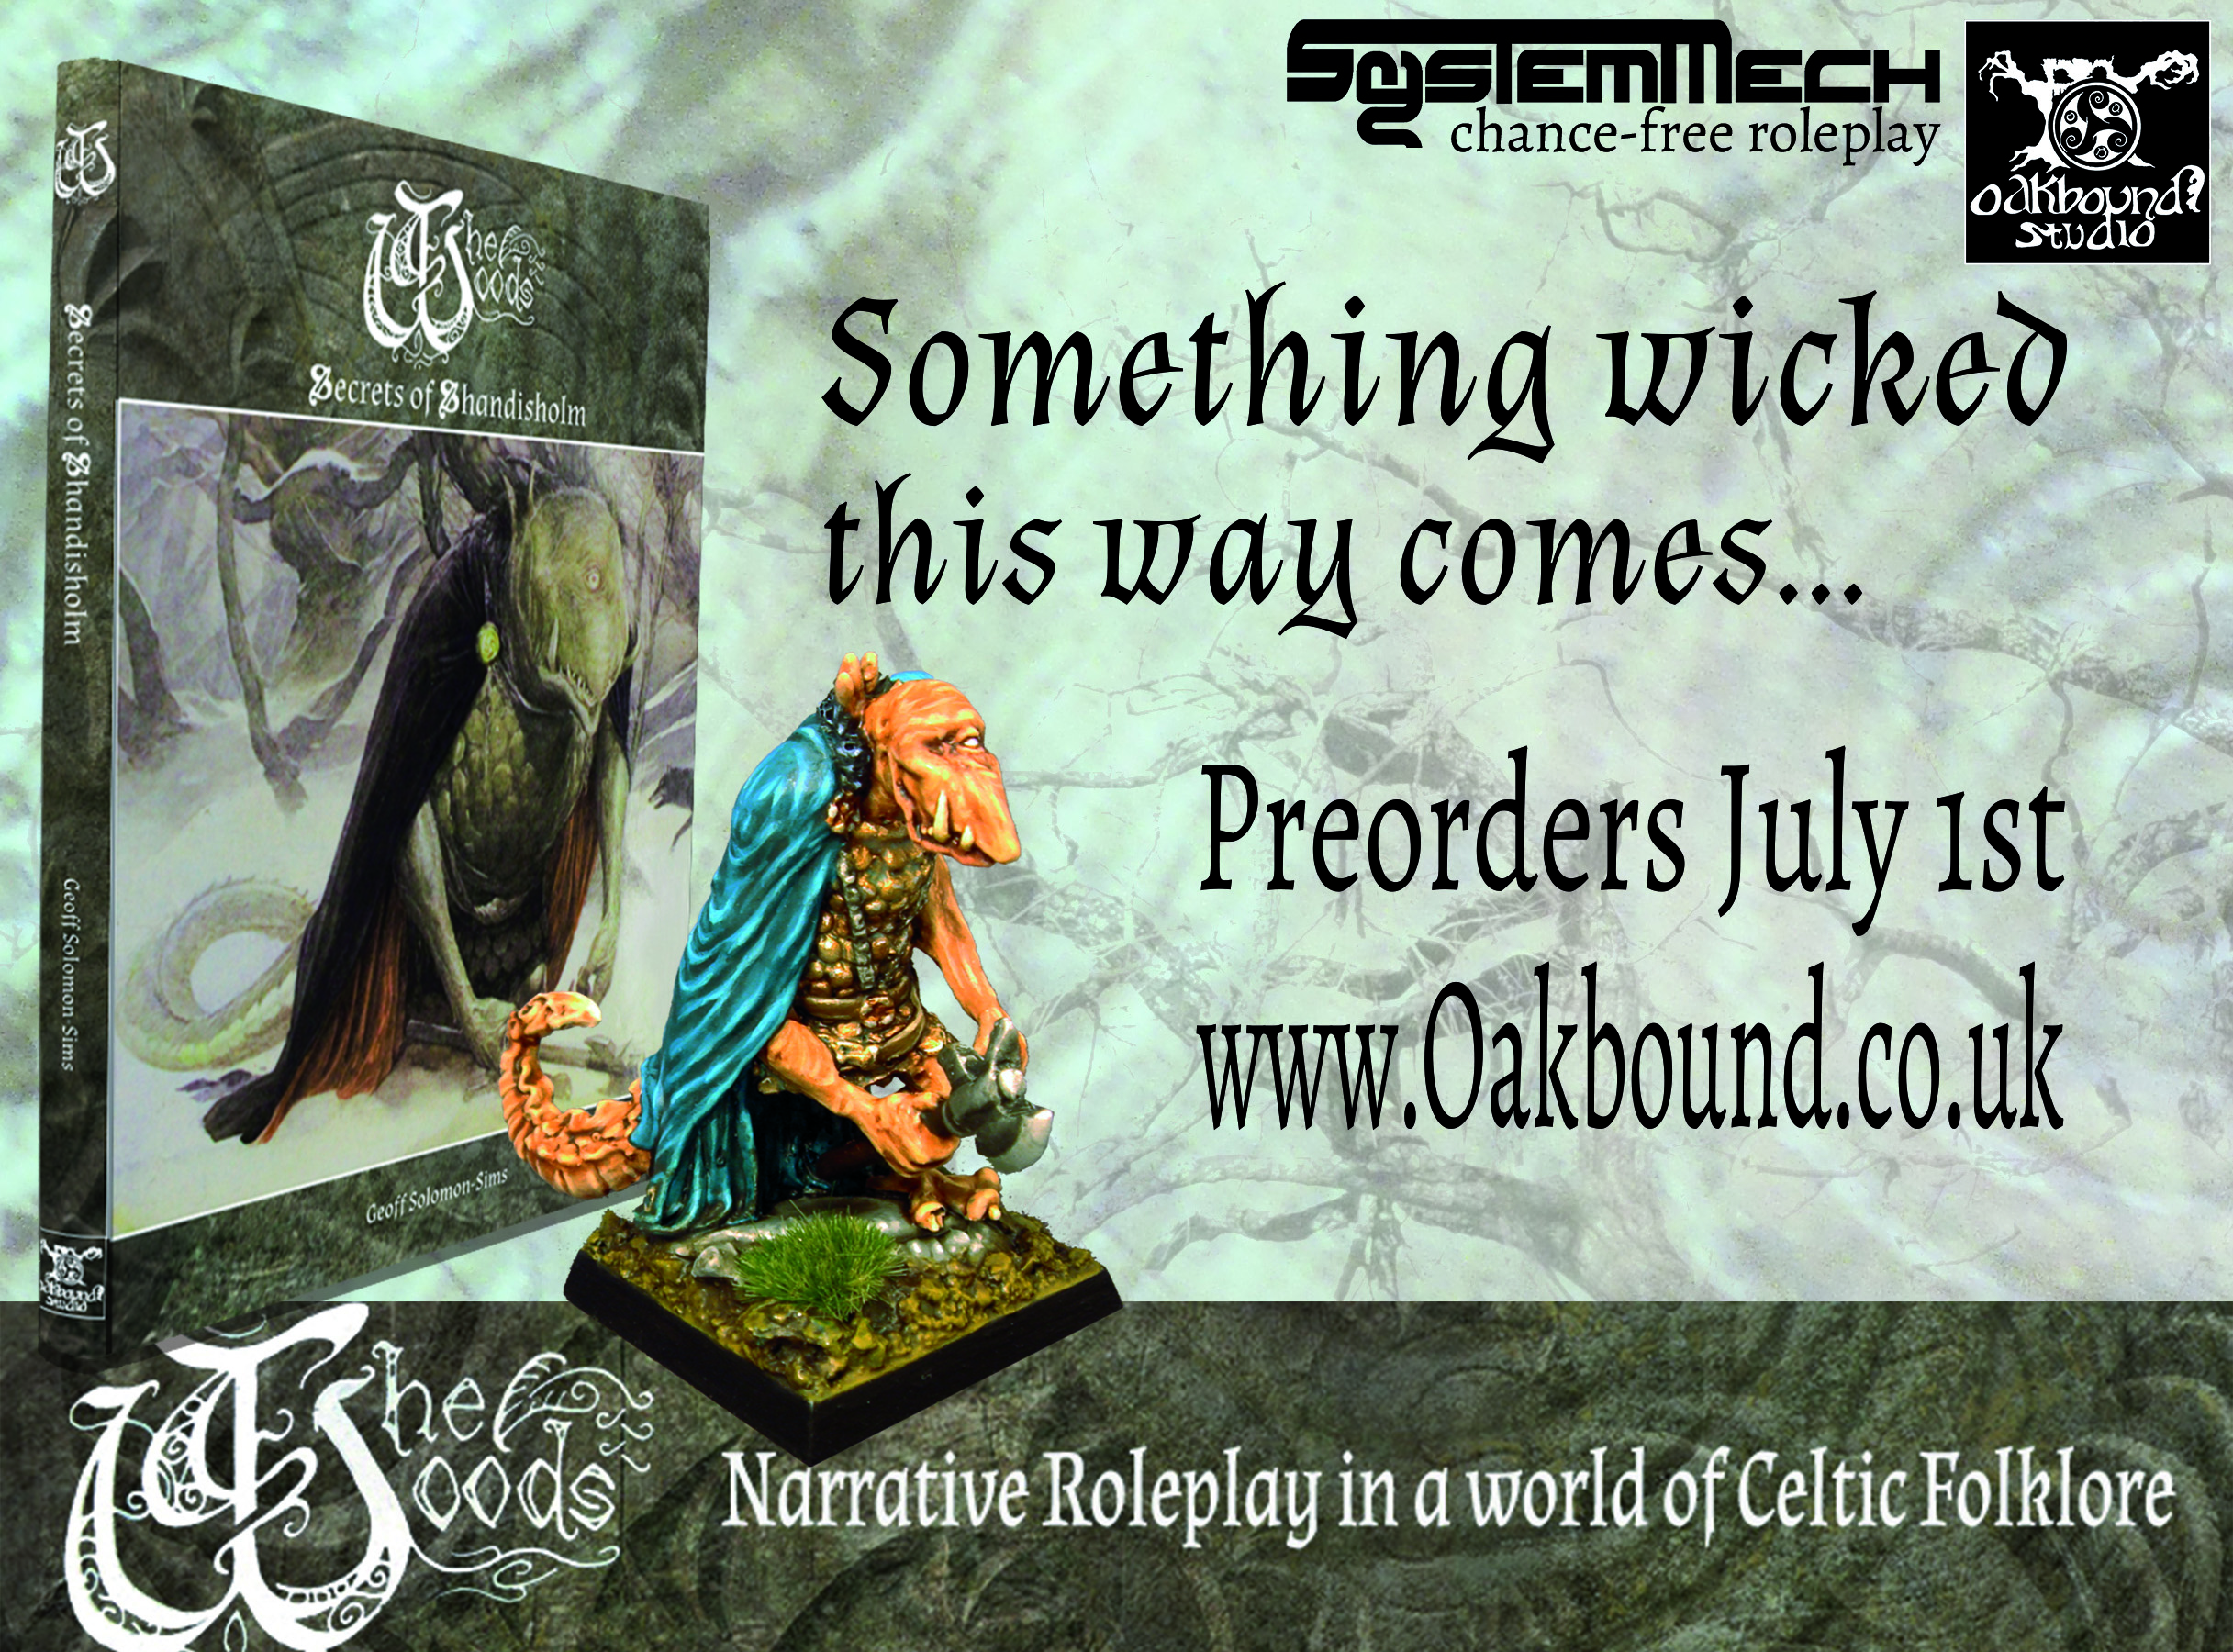 Chance-free roleplay in a world of Celtic myth, preorders July1st